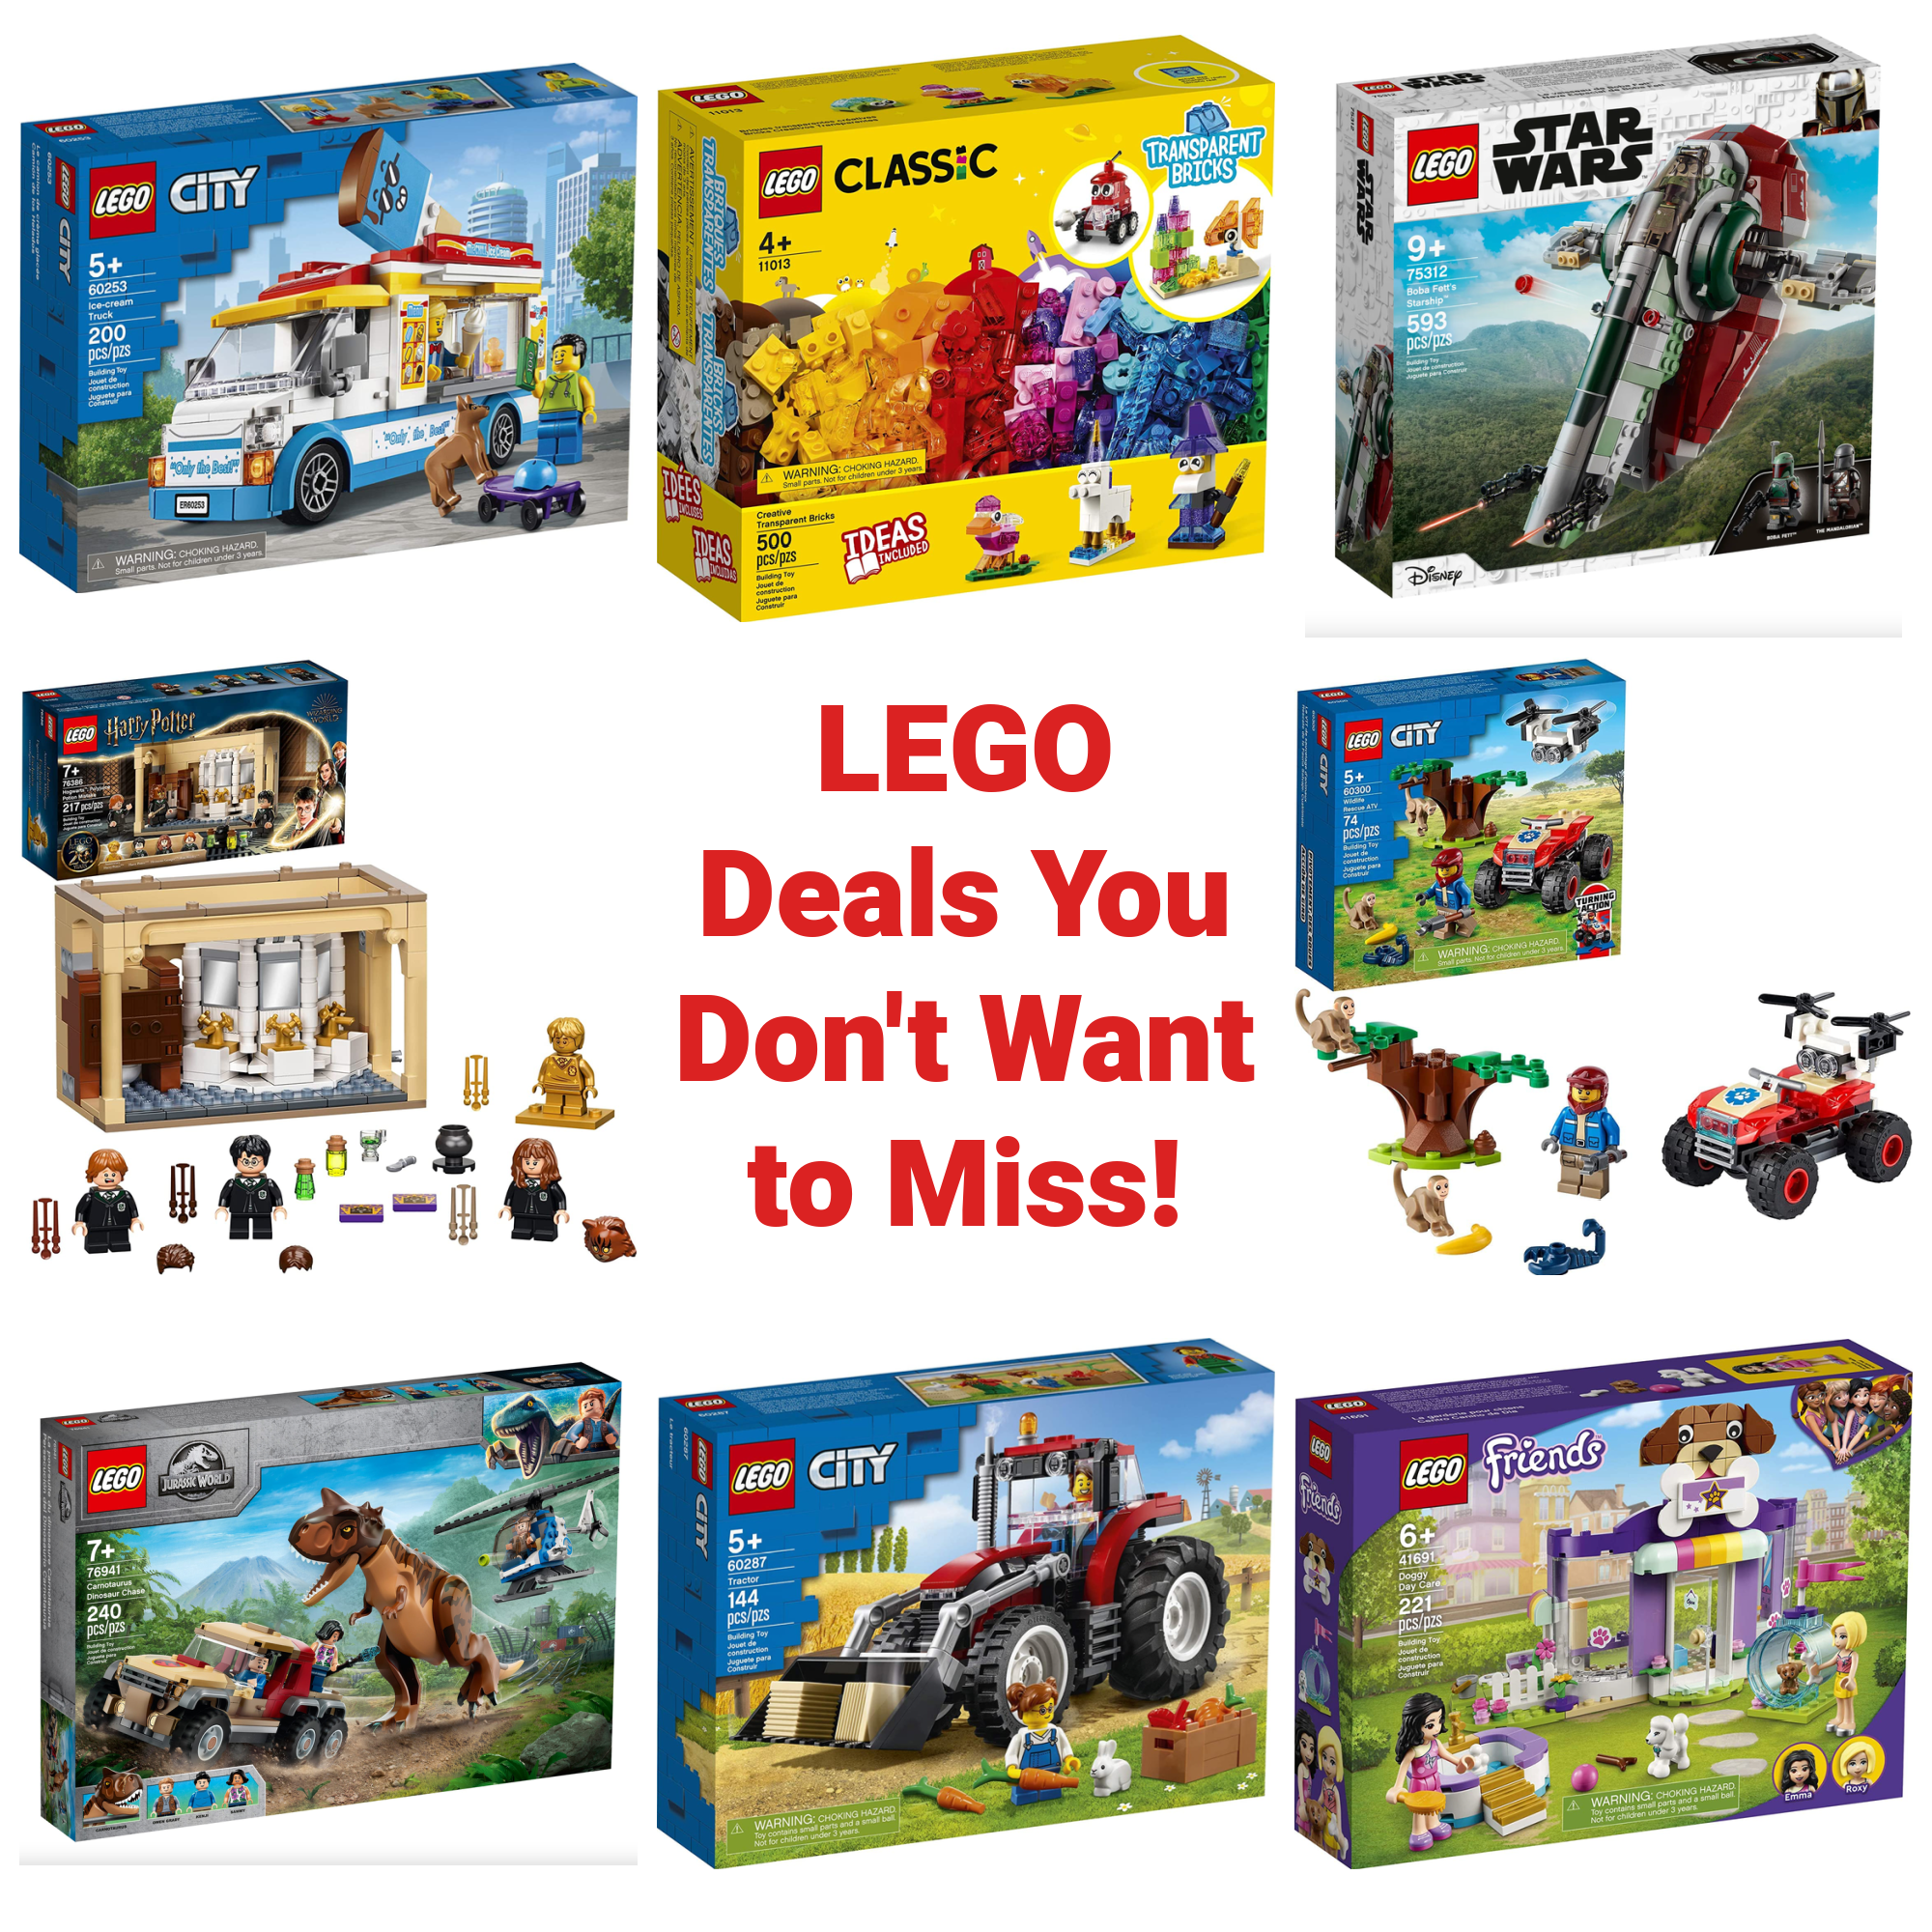 LEGO Deals on Amazon - April 1, 2022 - Frugal Fun For Boys and Girls